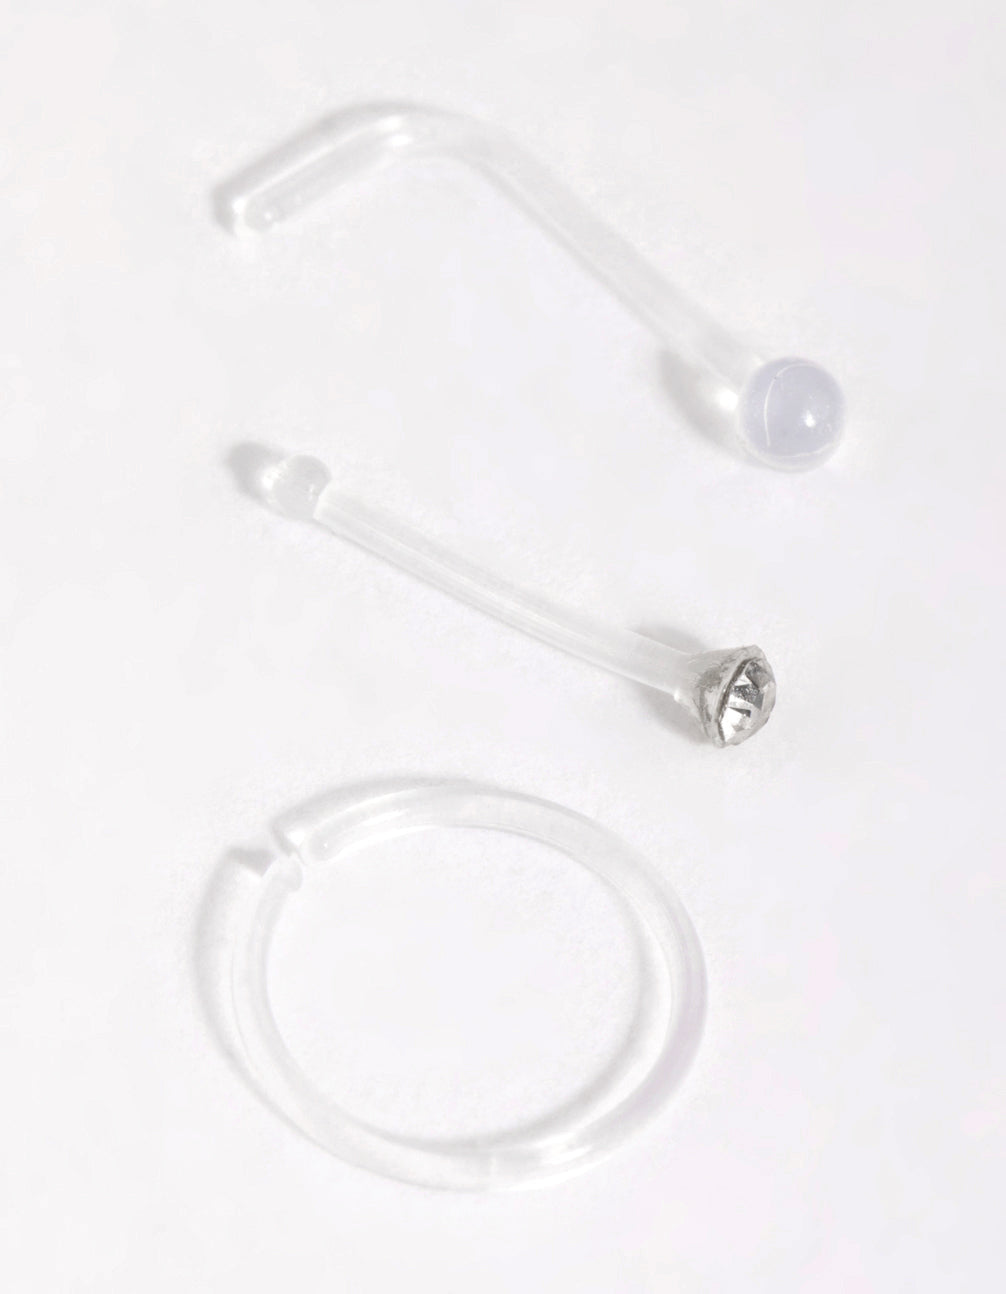 Plastic Earrings for Sensitive Ears - Silicone Post Jewelry for Piercing -  Bio-P